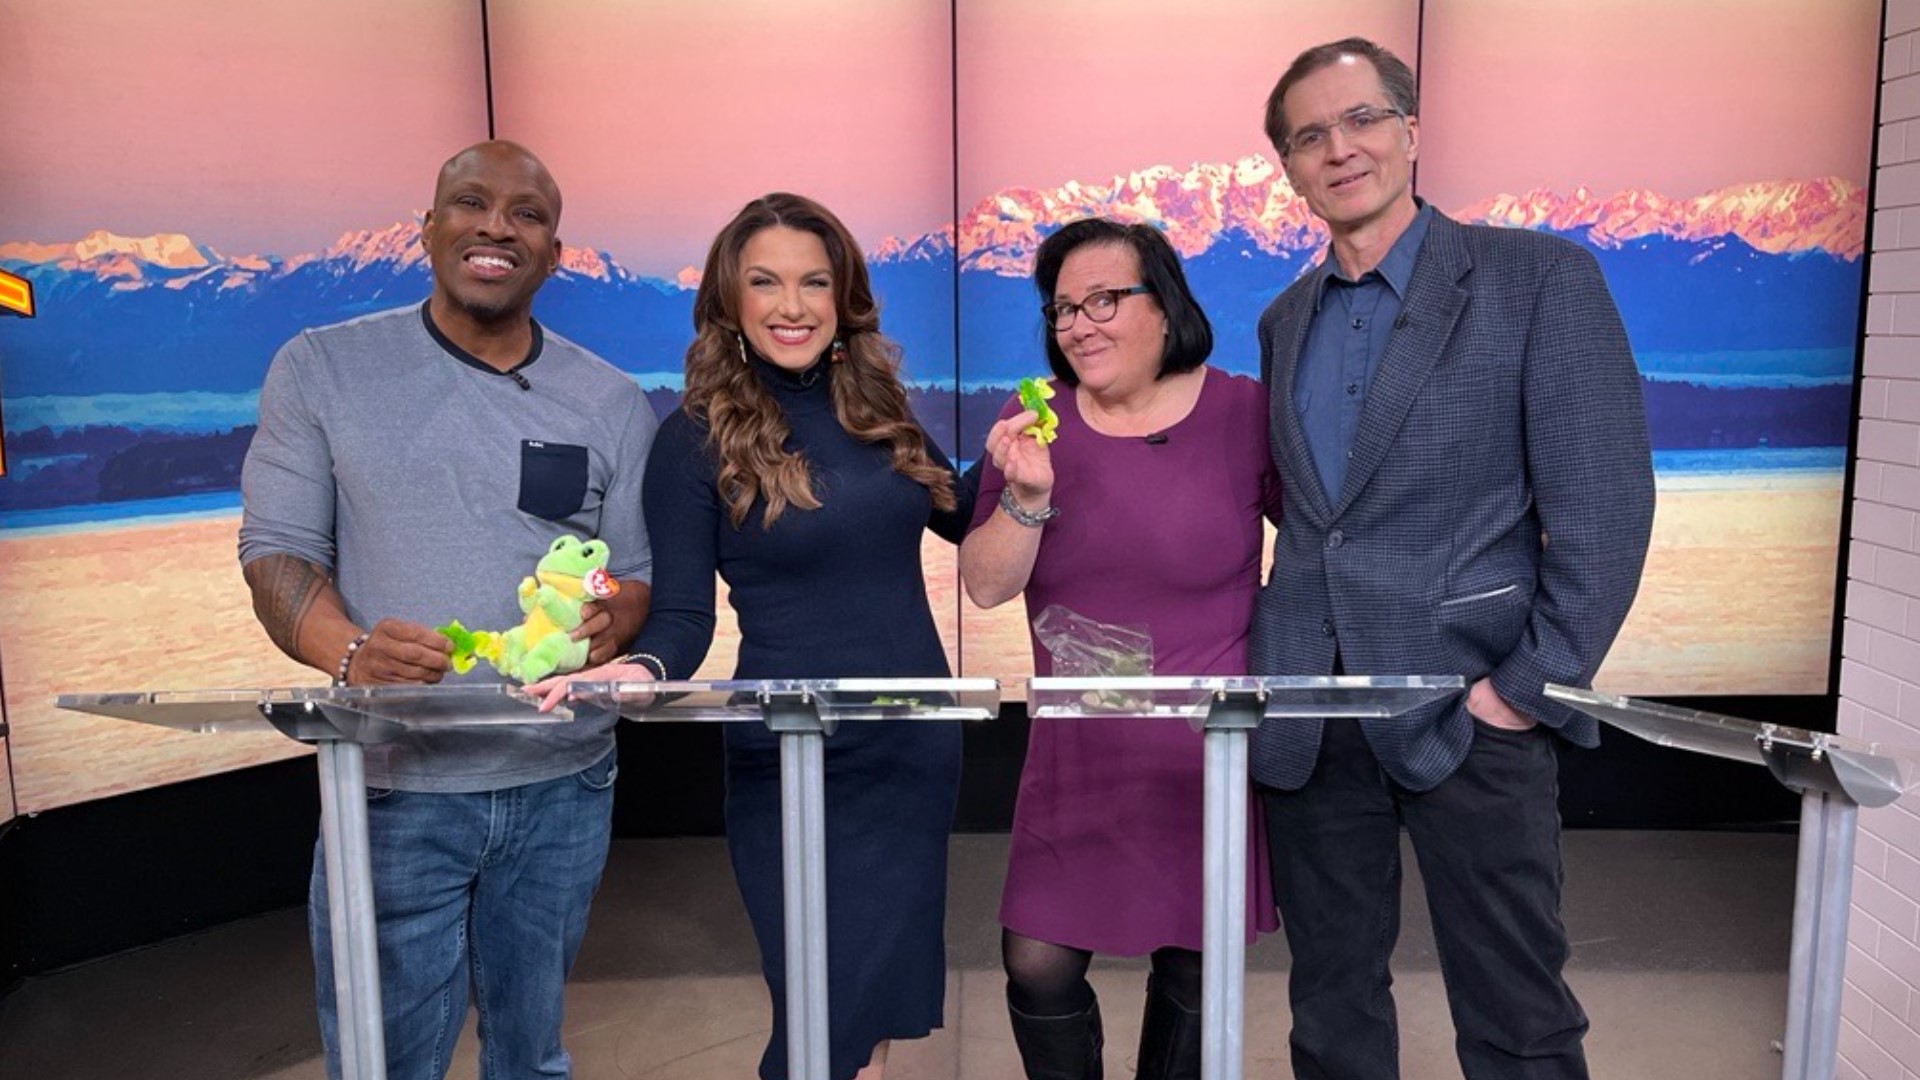 Historian Feliks Banel tests the Leap Day knowledge of Amity, Terry Hollimon and Mama Gone Geek's Lynne Brunelle with a round of trivia. #newdaynw